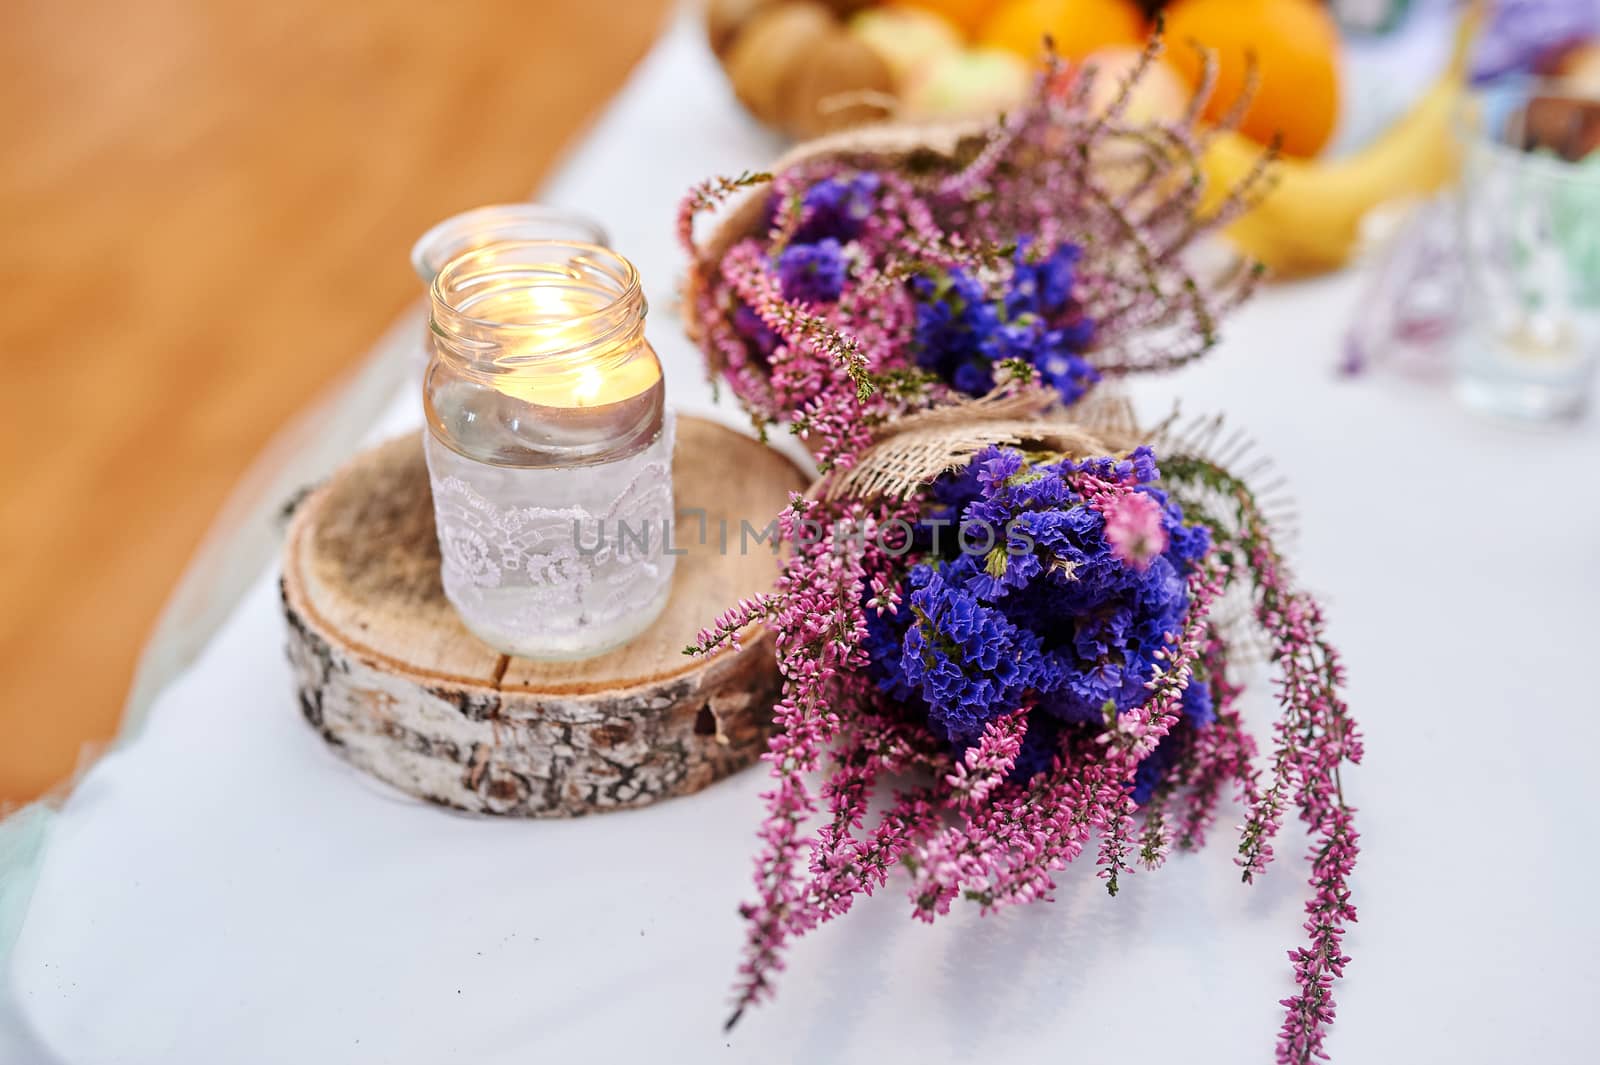 beautiful wedding decor on table with candle and bouquet in rustic style by timonko